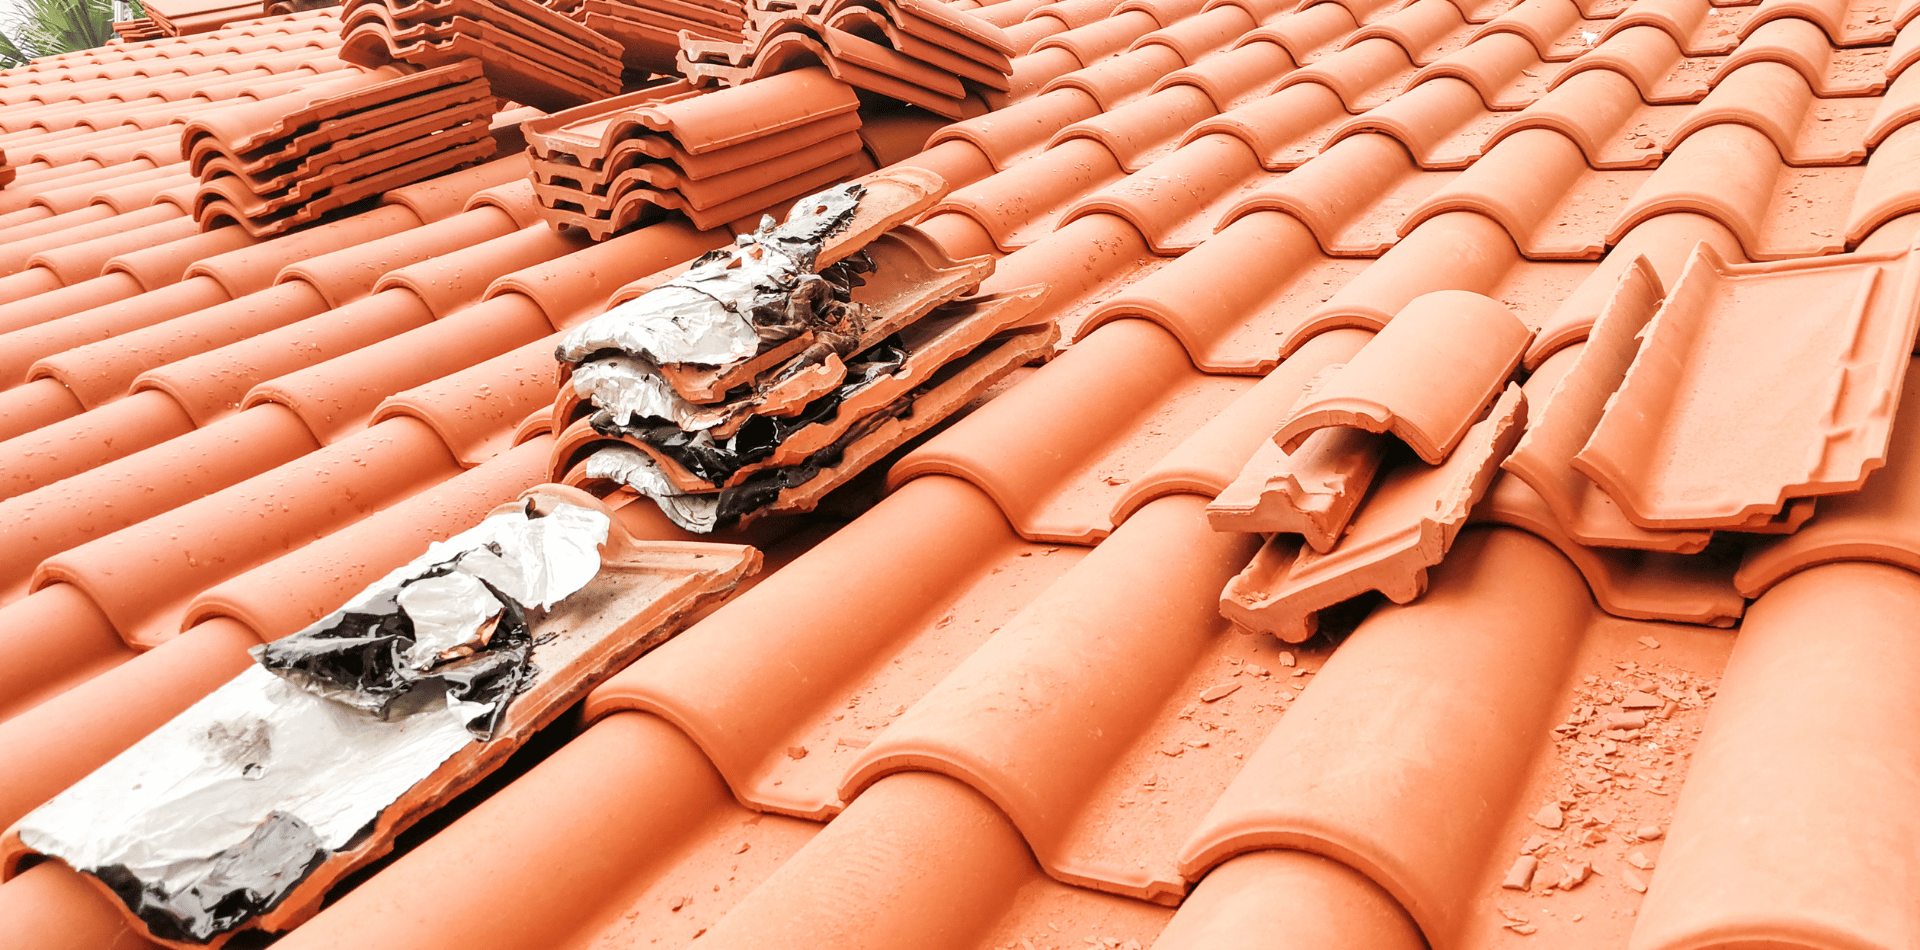 Preparing roof tiles for replacement